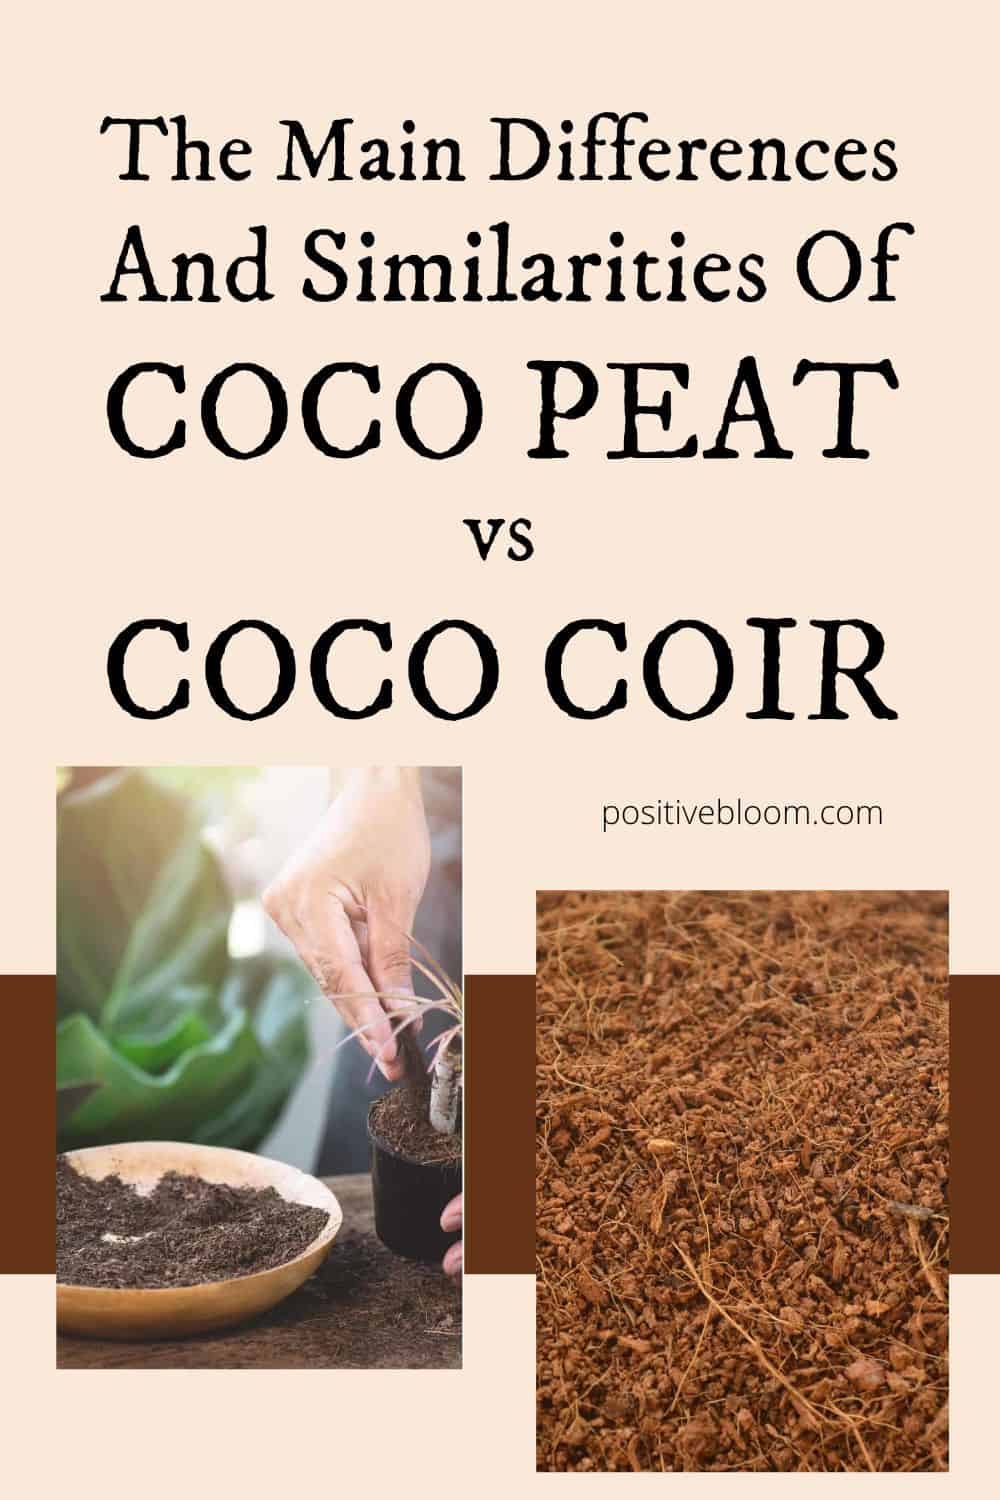 The Main Differences And Similarities Of Coco Peat vs Coco Coir